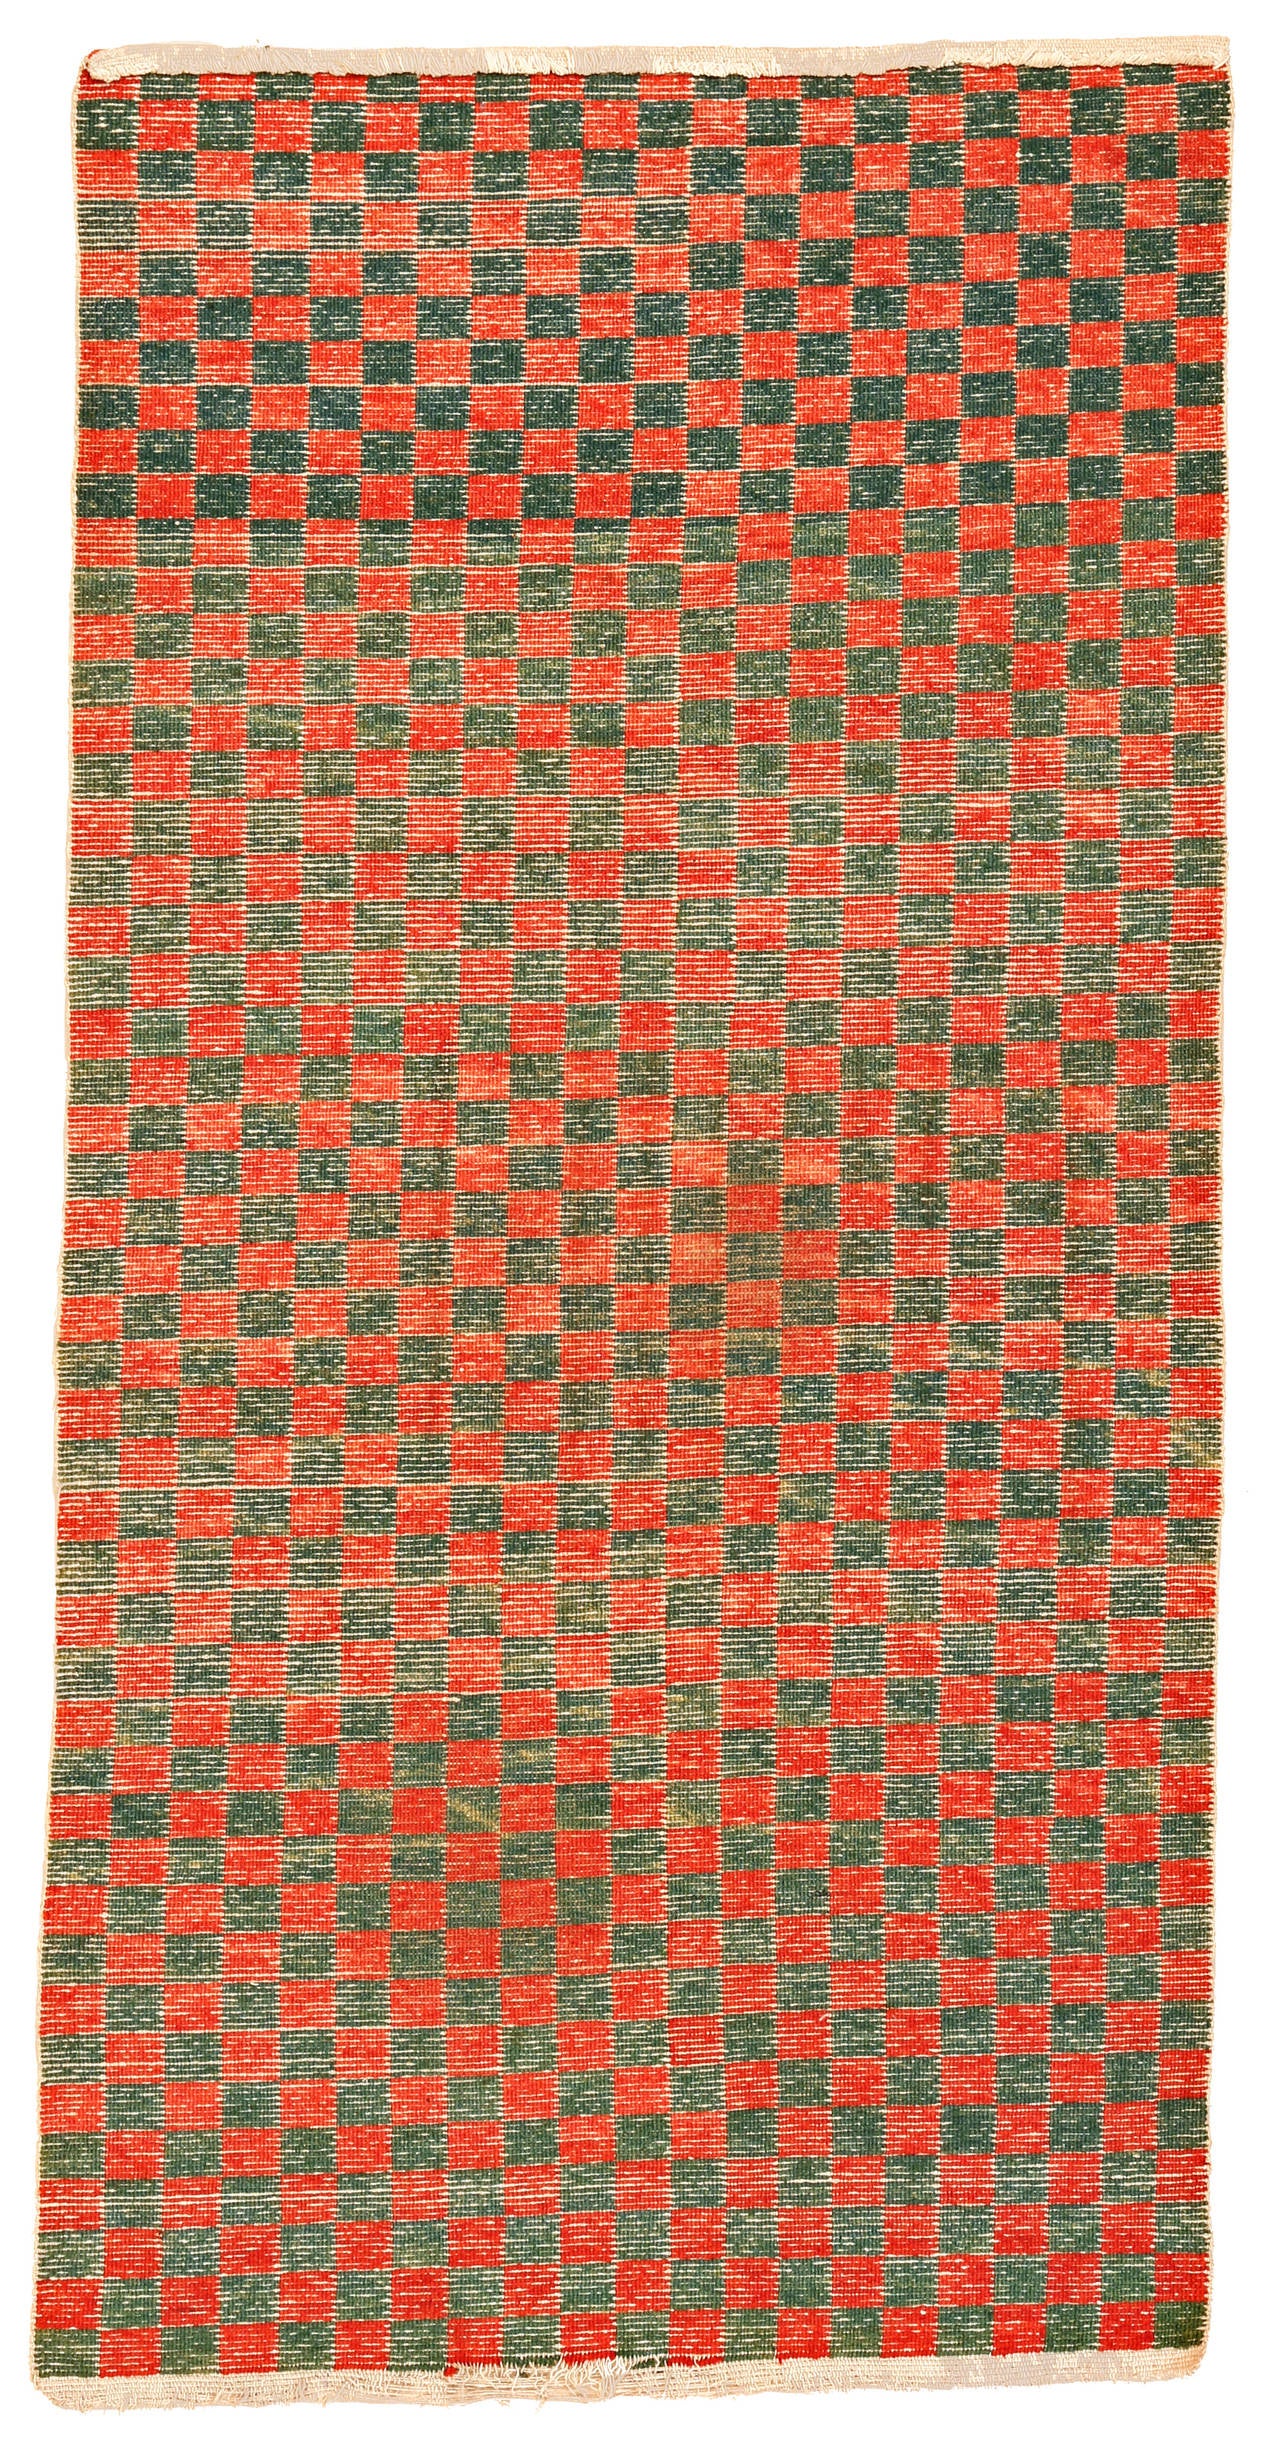 A trophy from my early hunting days in Tibet, this fine chequerboard rug belongs to the earliest group for this type, now almost extinct. The wool is as soft as cashmere and the colours are rich and fully saturated. It adorned for many years the